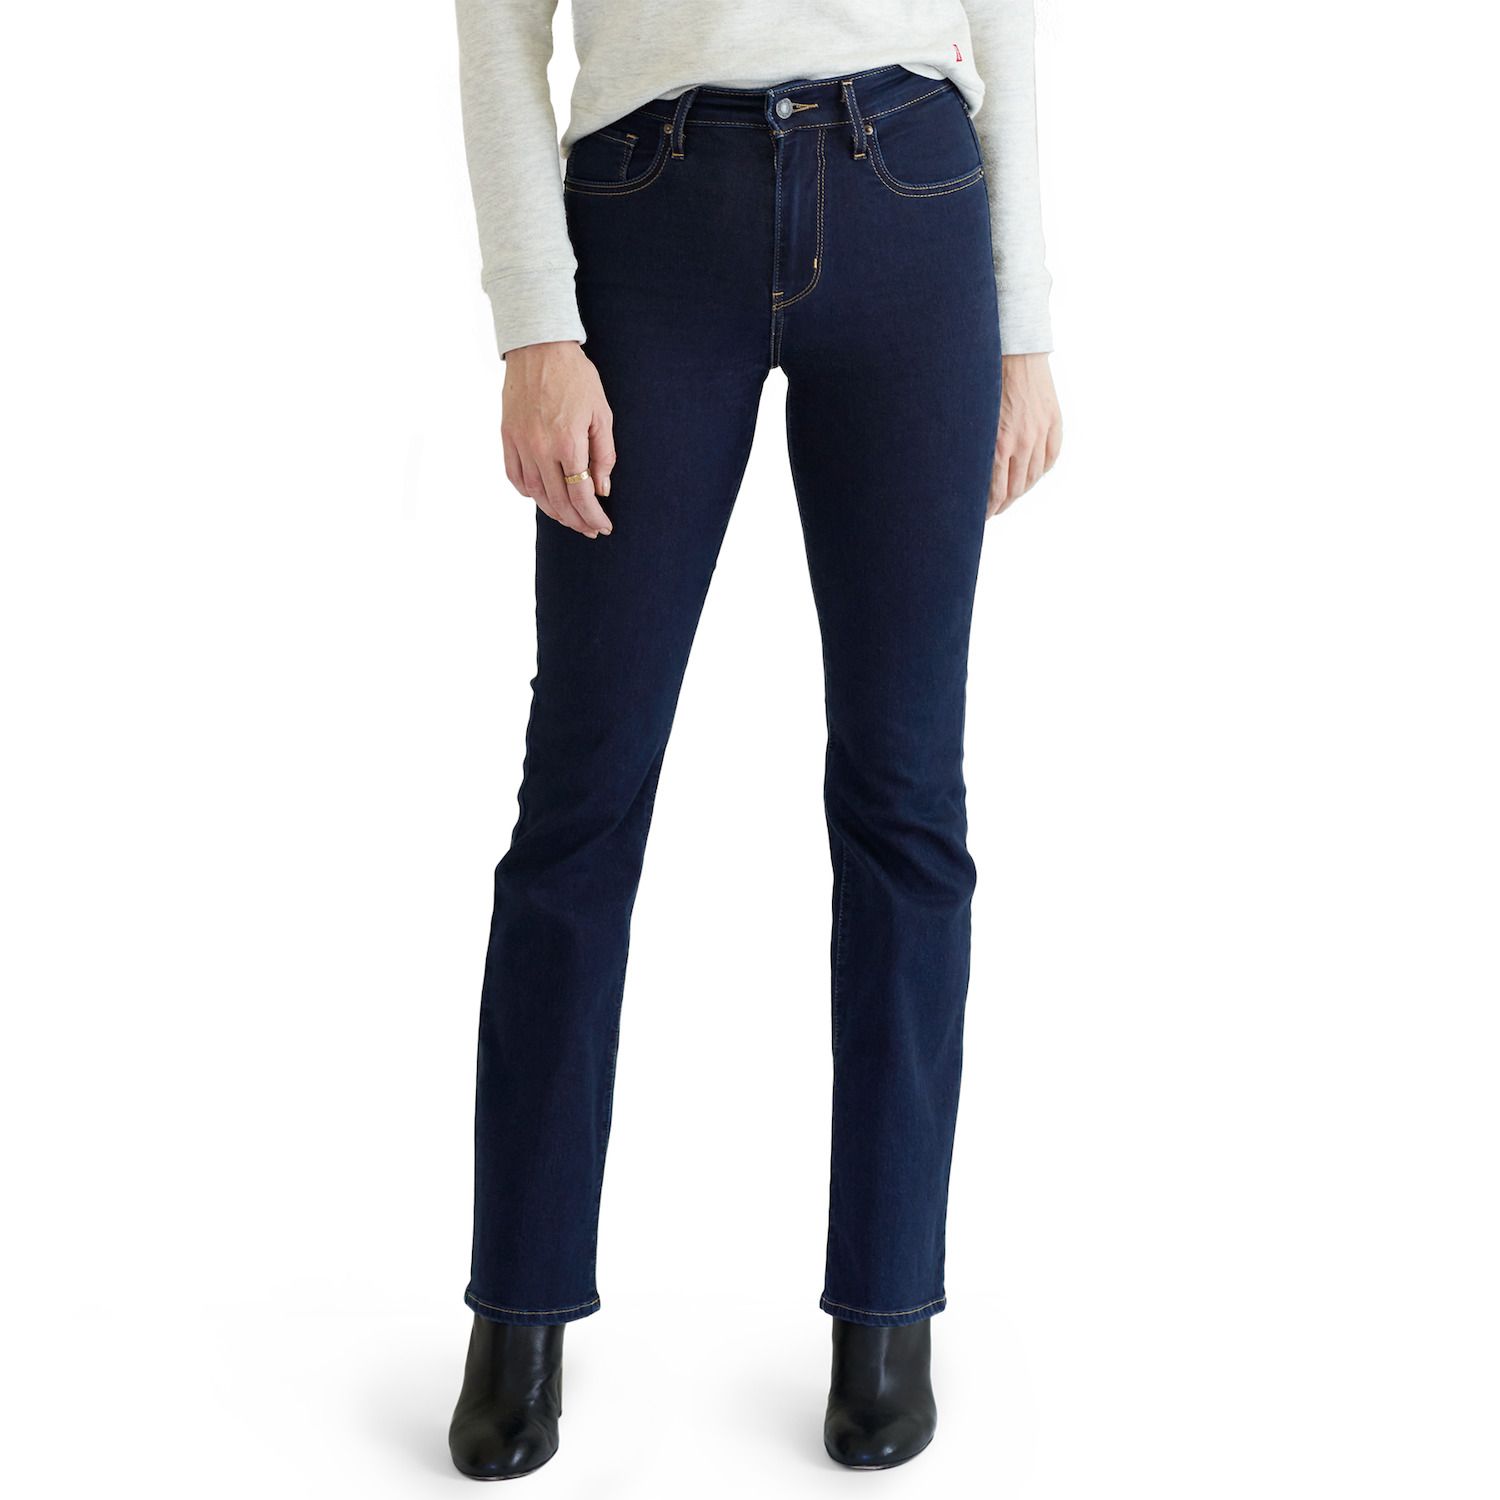 Image for Levi's Women's 725 High Rise Bootcut Jeans at Kohl's.